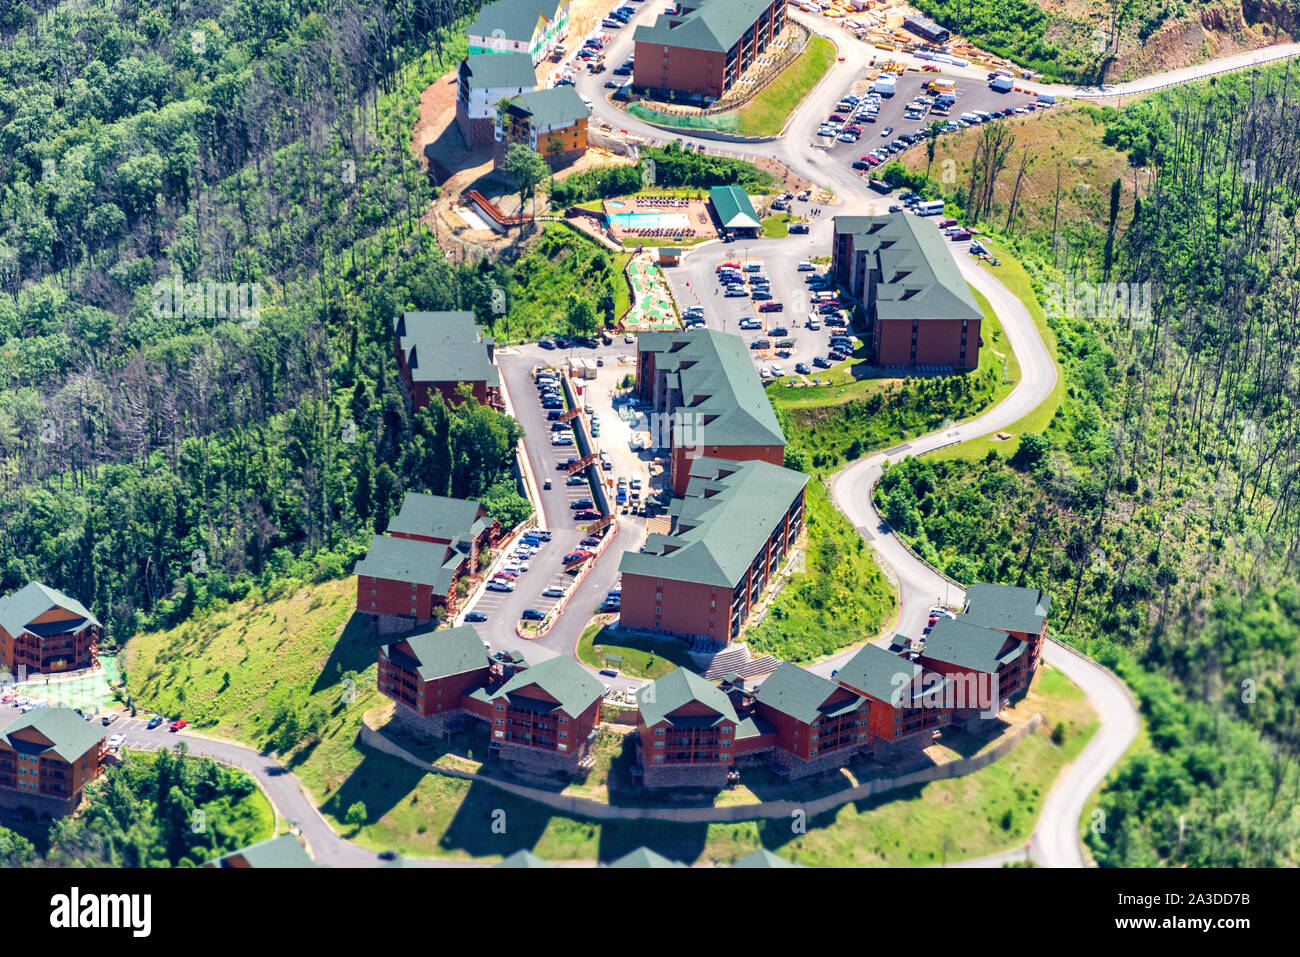 East Tennessee, United States, June 14, 2019: Horizontal aerial view of vacation condos in East Tennessee Stock Photo